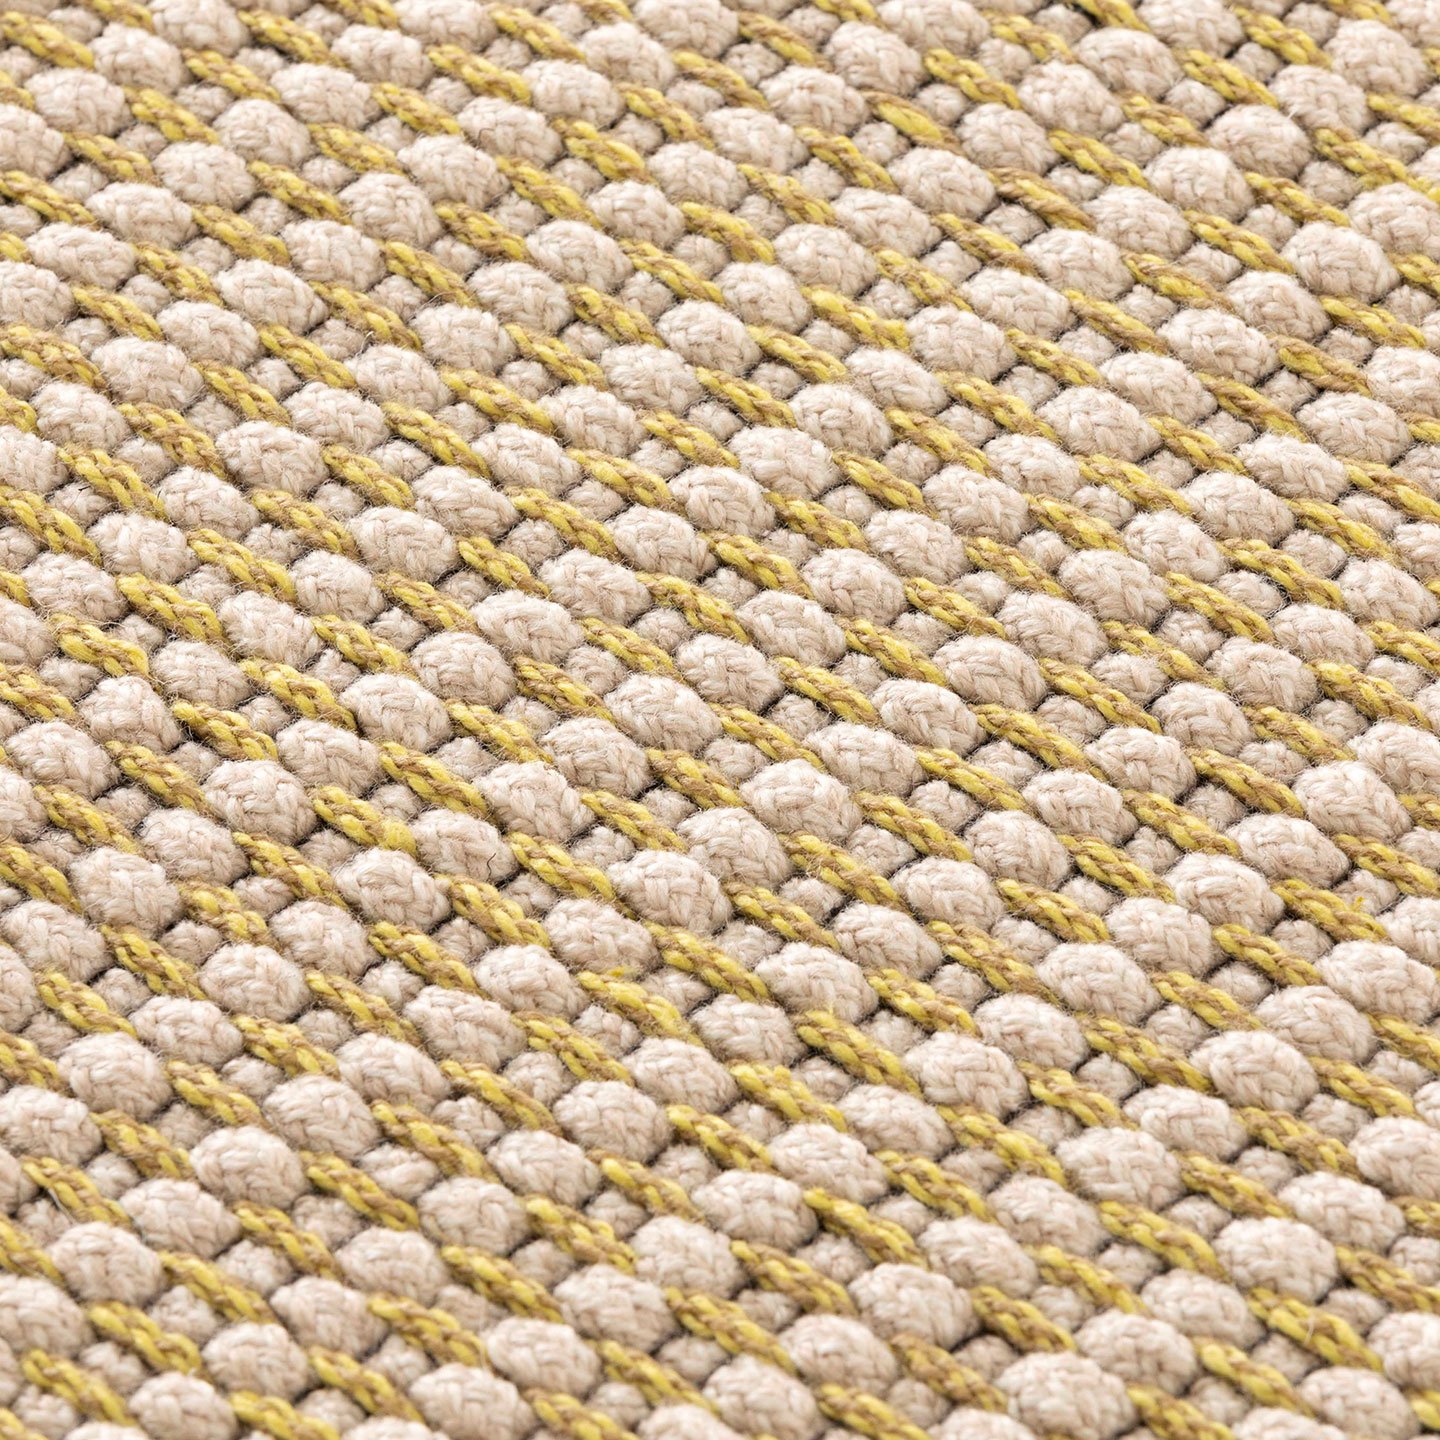 Haworth Cord Rug in white color with yellow accent